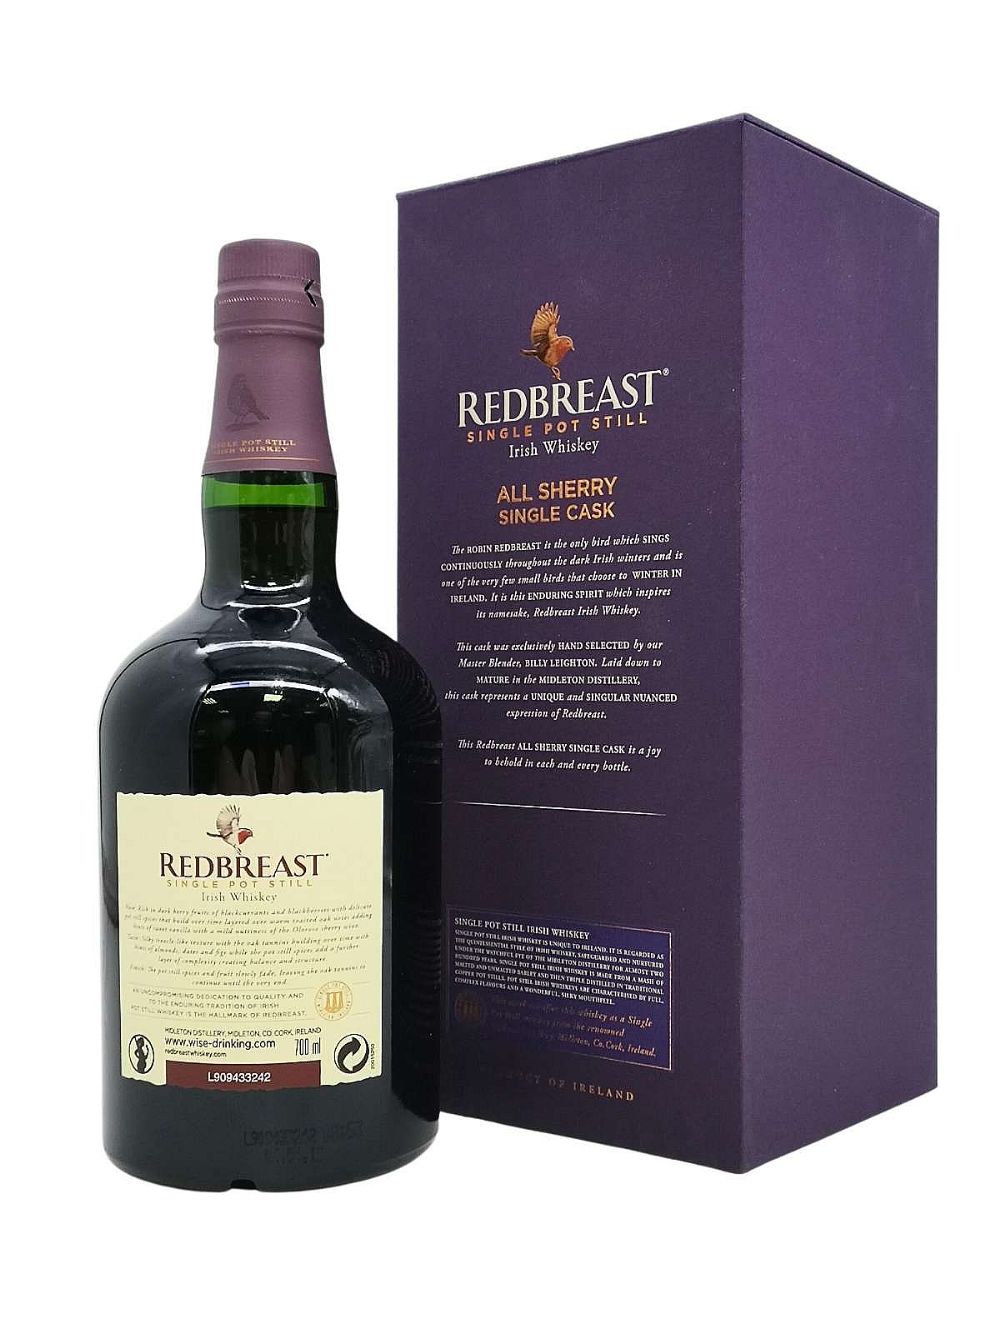 Redbreast 16 year old Single Cask (bottle no. 001), Celtic Whiskey Shop Exclusive, Cask no. 34970 